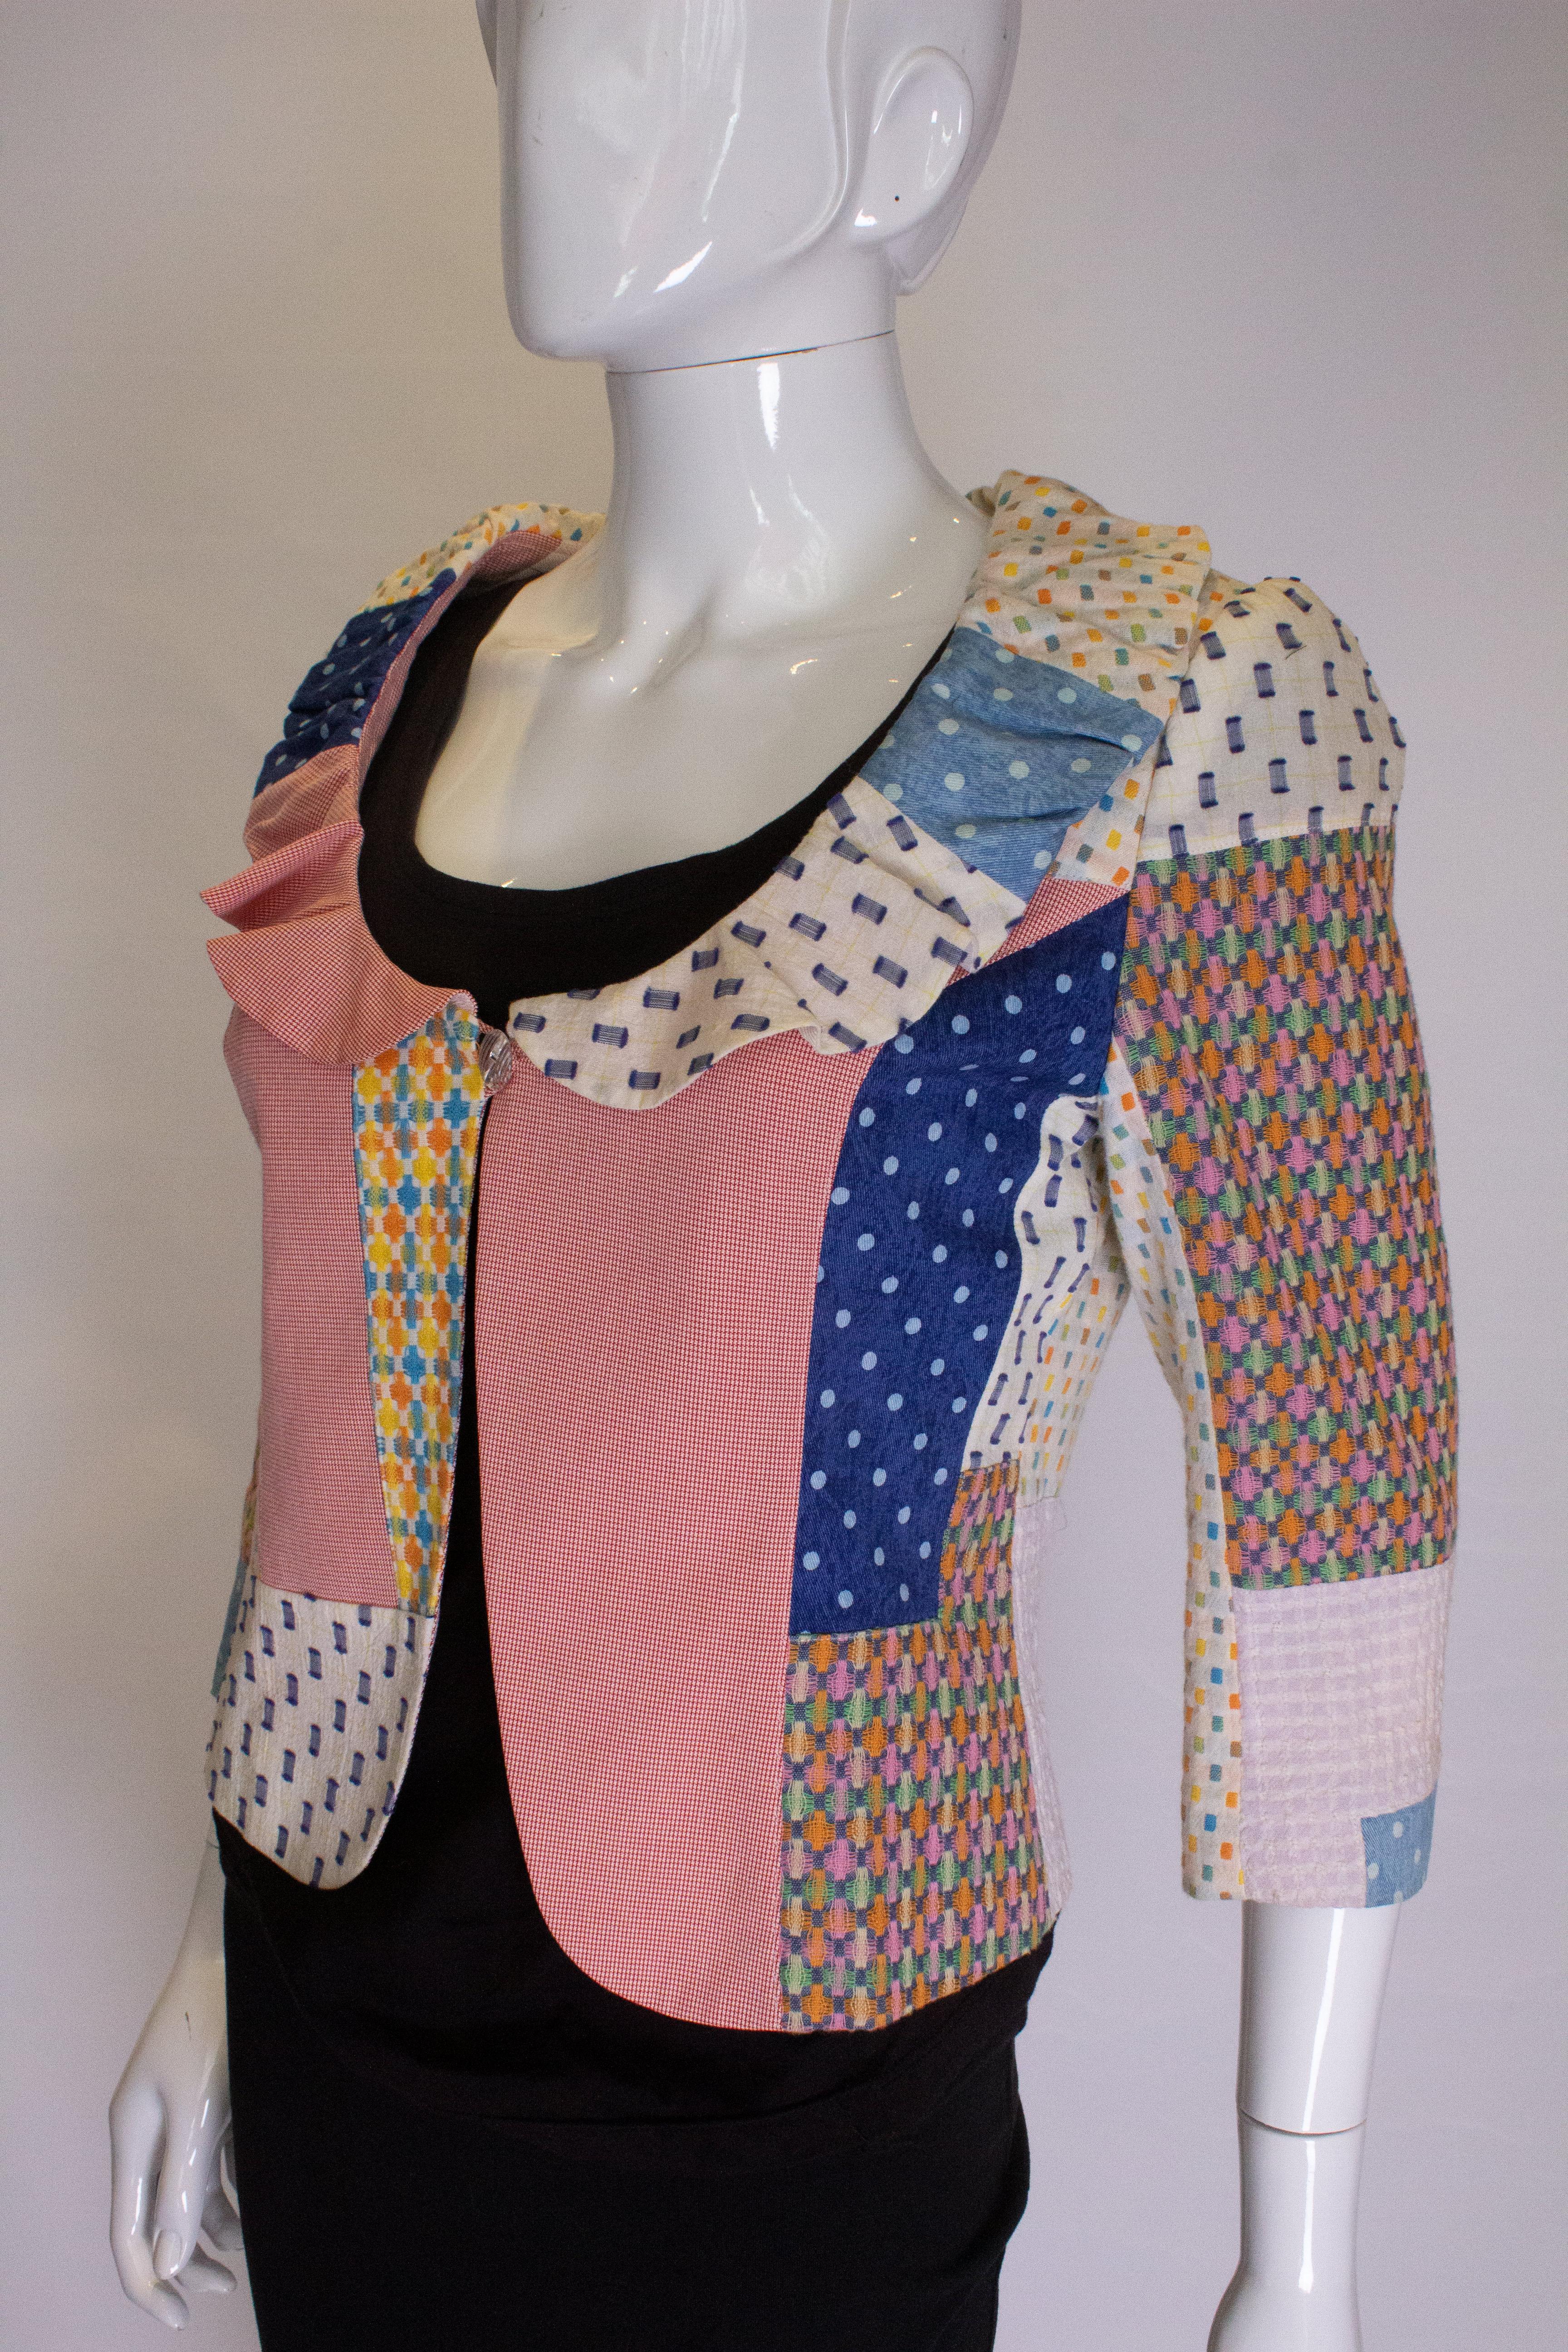 Vintage Patchwork Jacket In Good Condition For Sale In London, GB